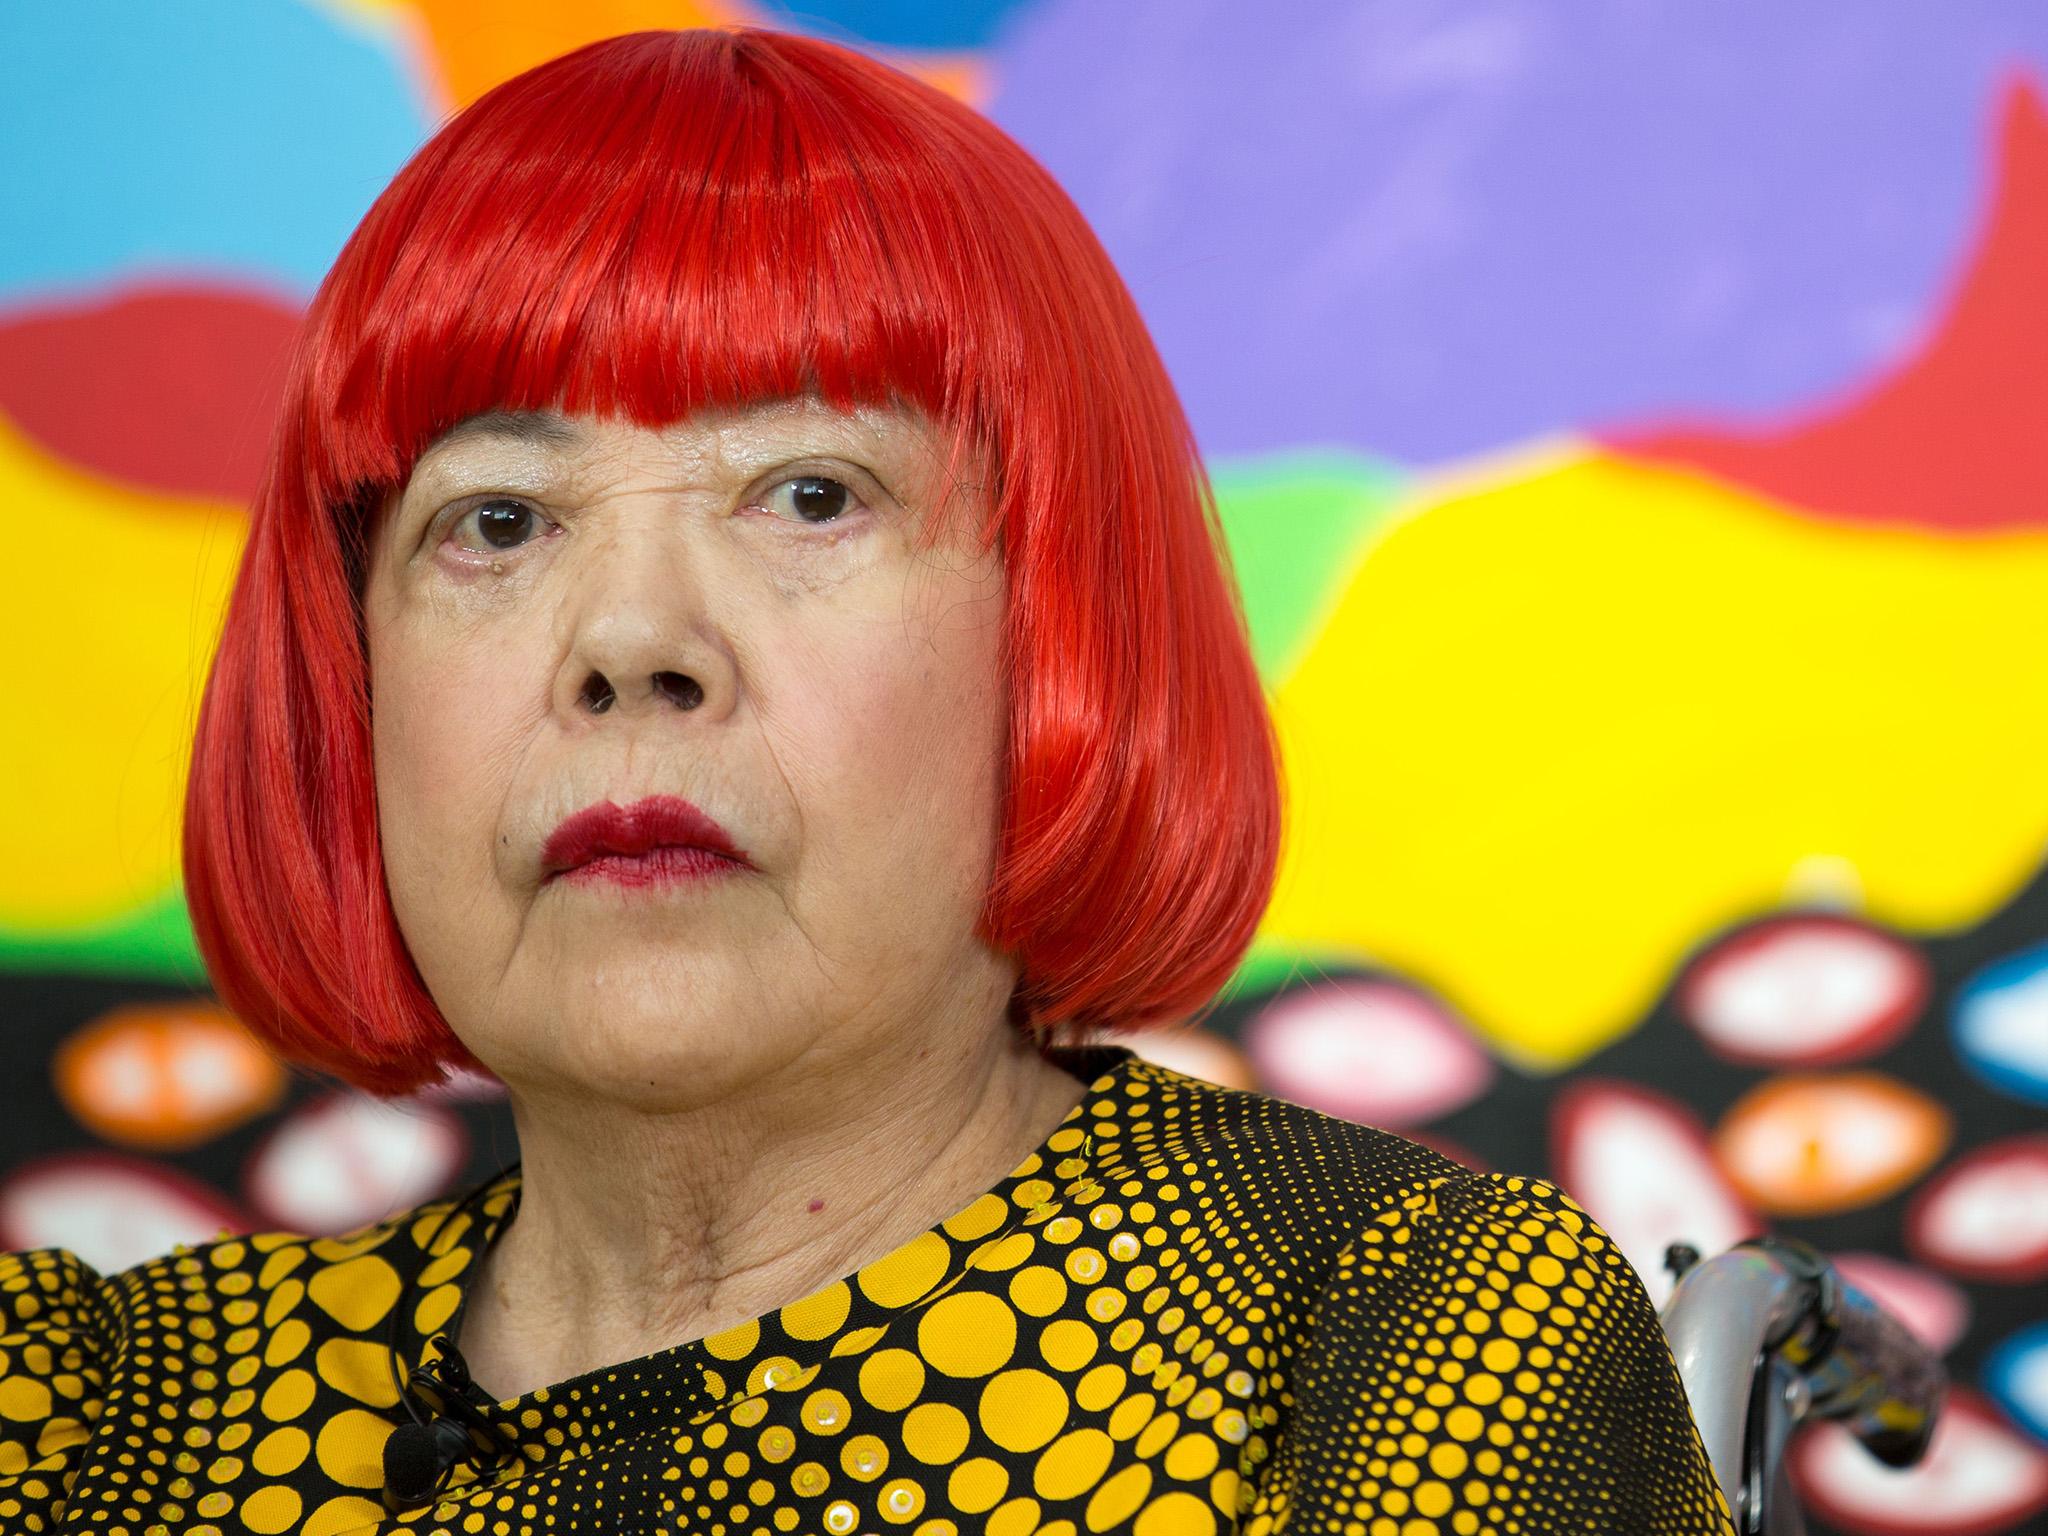 Yayoi Kusama How The Instagram Generation Fell In Love With The Worlds Top Selling Living 